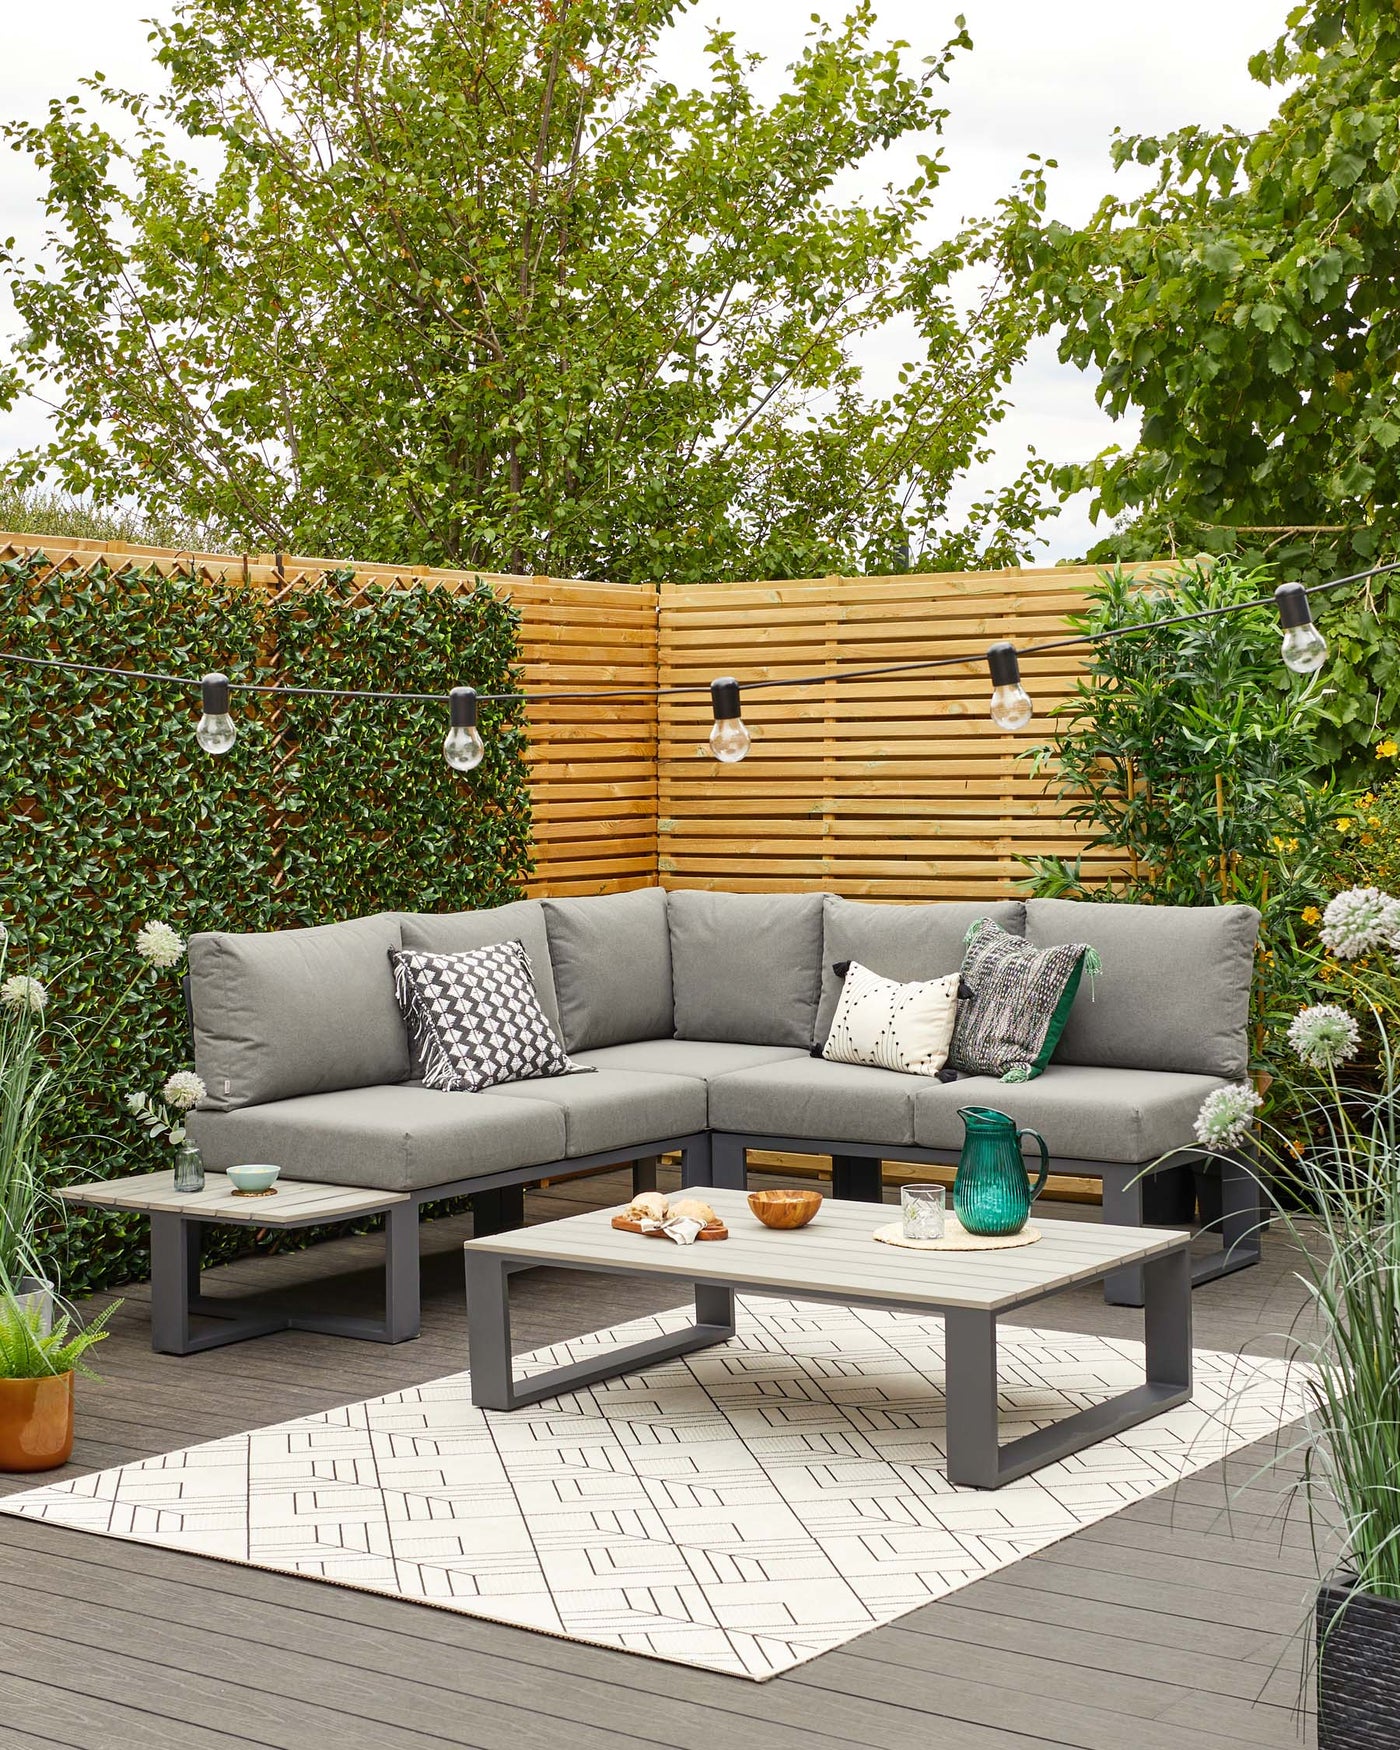 Outdoor sectional sofa with grey cushions on a dark frame situated on a wooden deck, accompanied by a matching low rectangular coffee table also in dark tones. The setup is completed with decorative pillows, a textured outdoor rug with geometric patterns, and ambient string lights overhead. A few potted plants add a touch of greenery to the cosy setup.